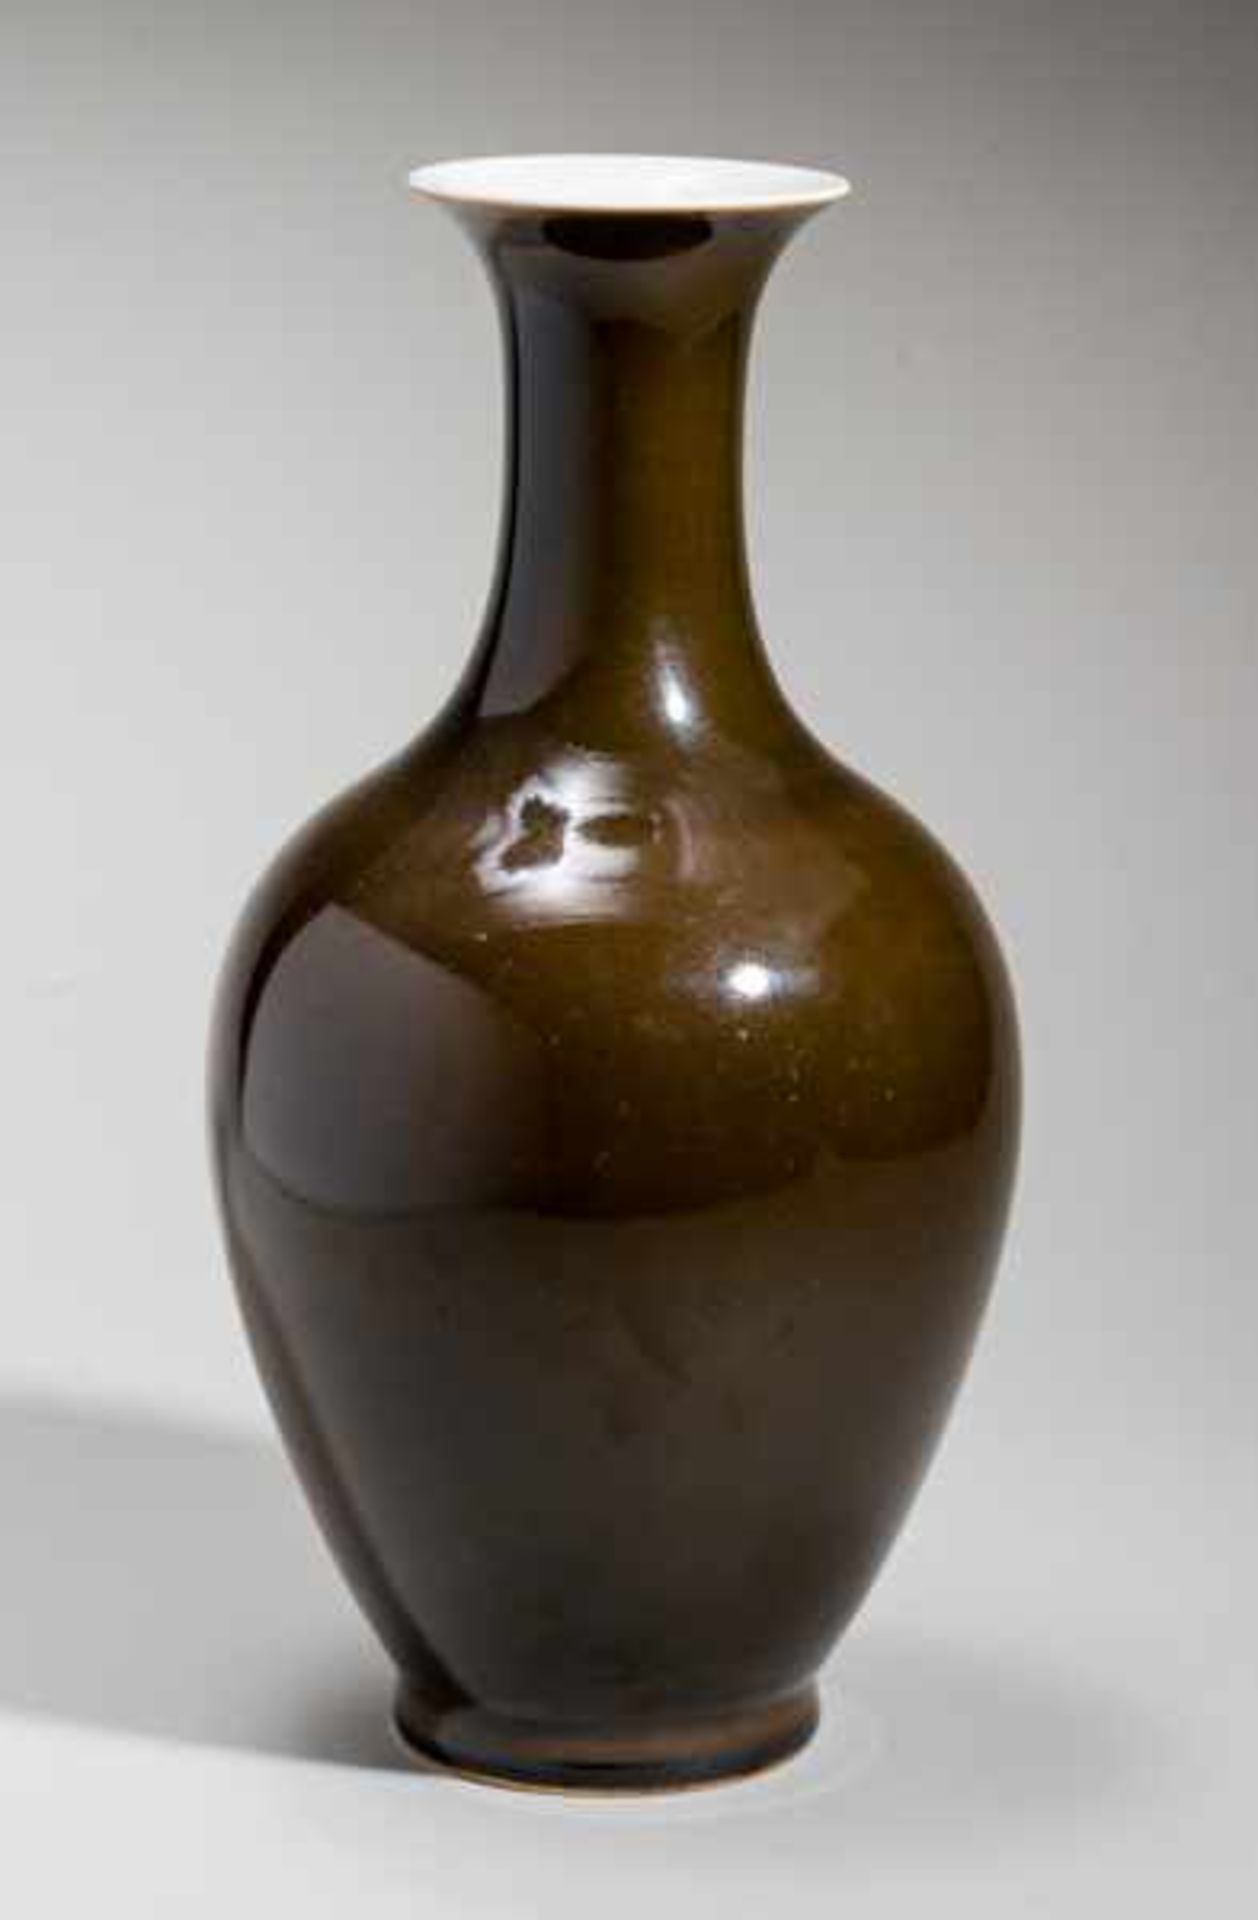 VASE (HU) WITH LONG NECK Porcelain. China, 高頸瓶Harmonious, hu-form vase with an ovoid body and long